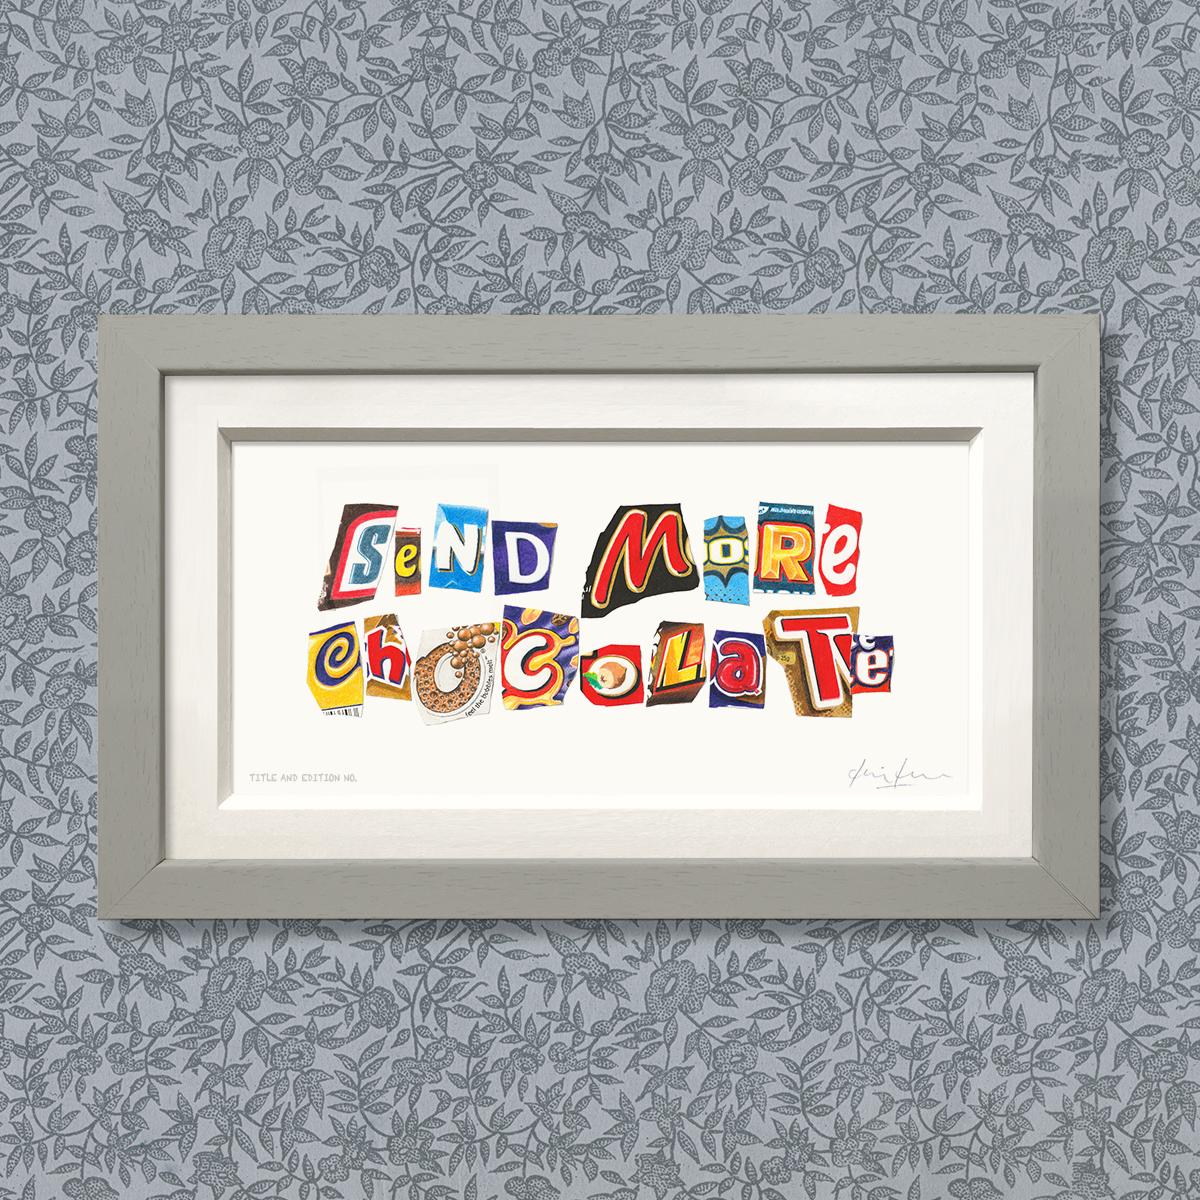 Limited edition print (smaller version) of drawing of cut-out letters - Send More Chocolate - in a grey frame.